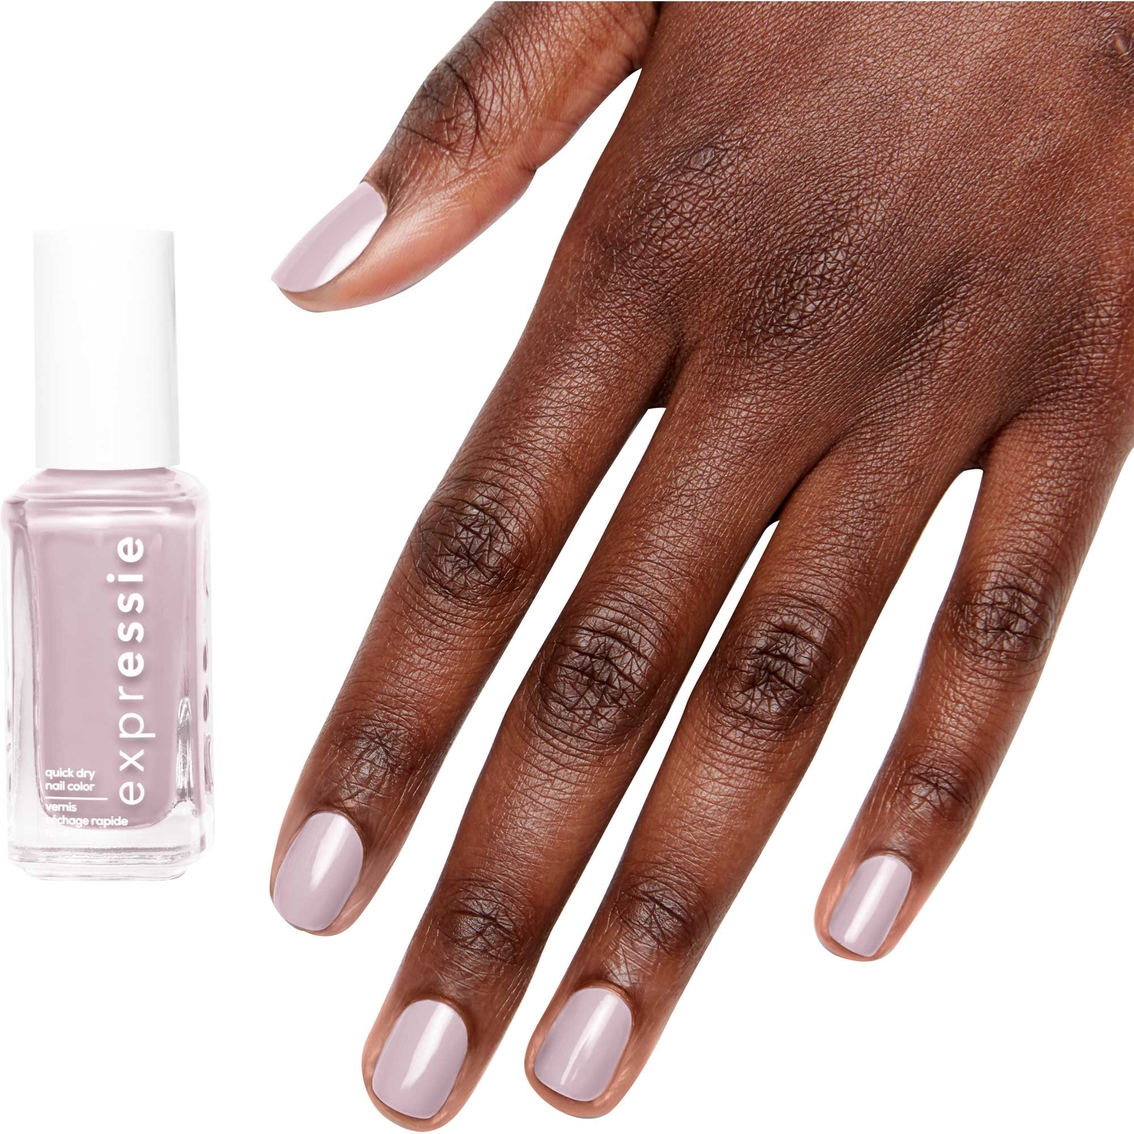 Essie Expressie | Exchange Health Quick-dry Nail Polish Crave | Pink Chaos The Polish Beauty | & Shop The Nail